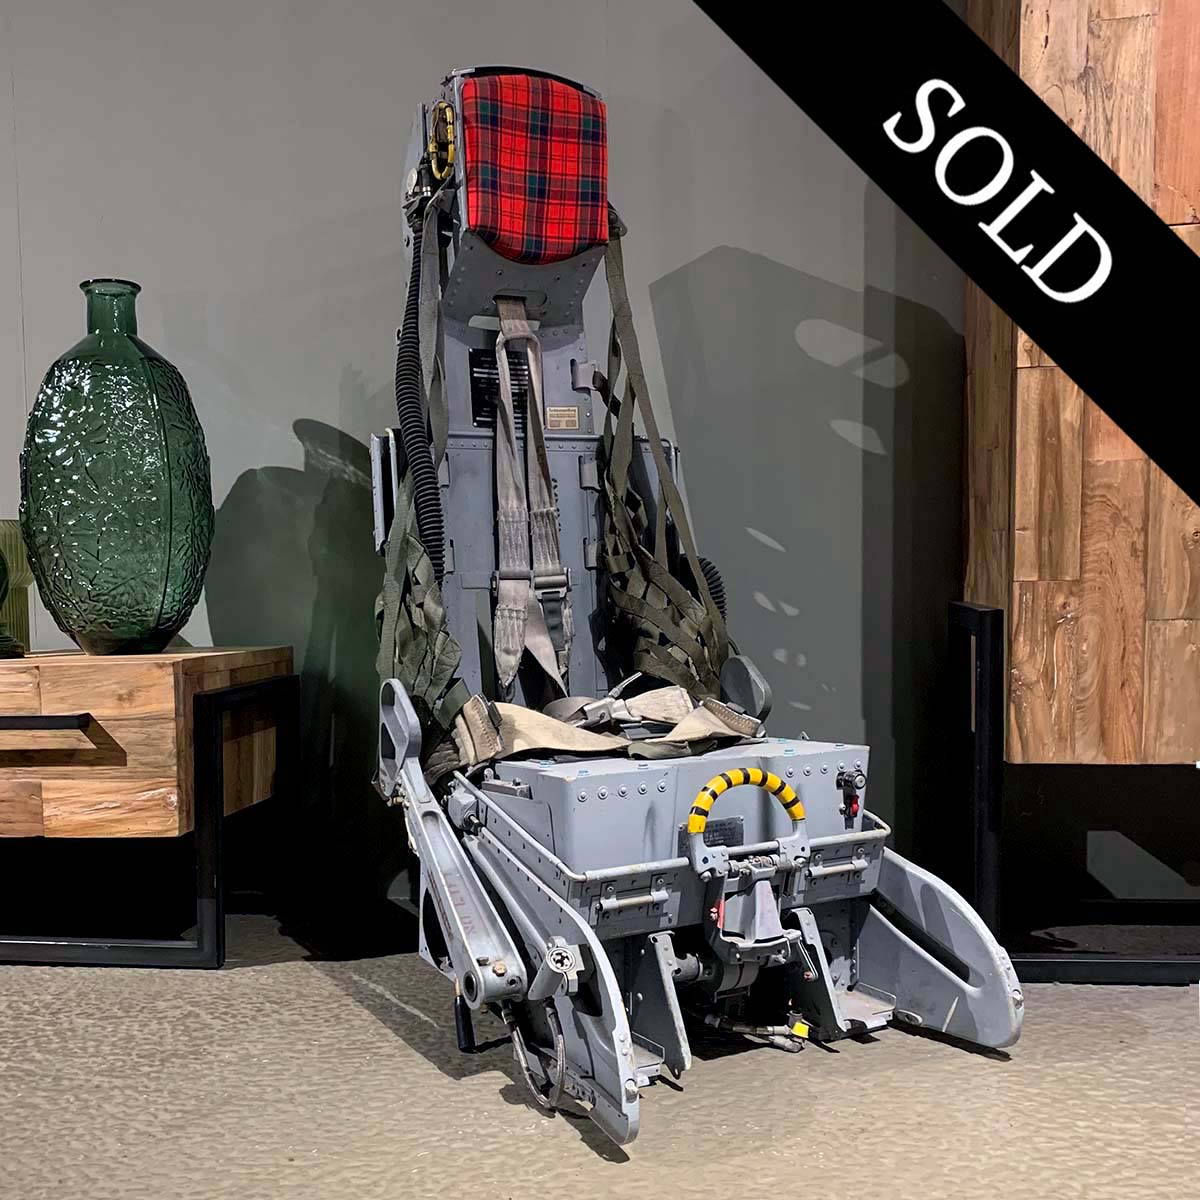 Lockheed C2 ejection seat, for the F-104 Starfighter, for sale.